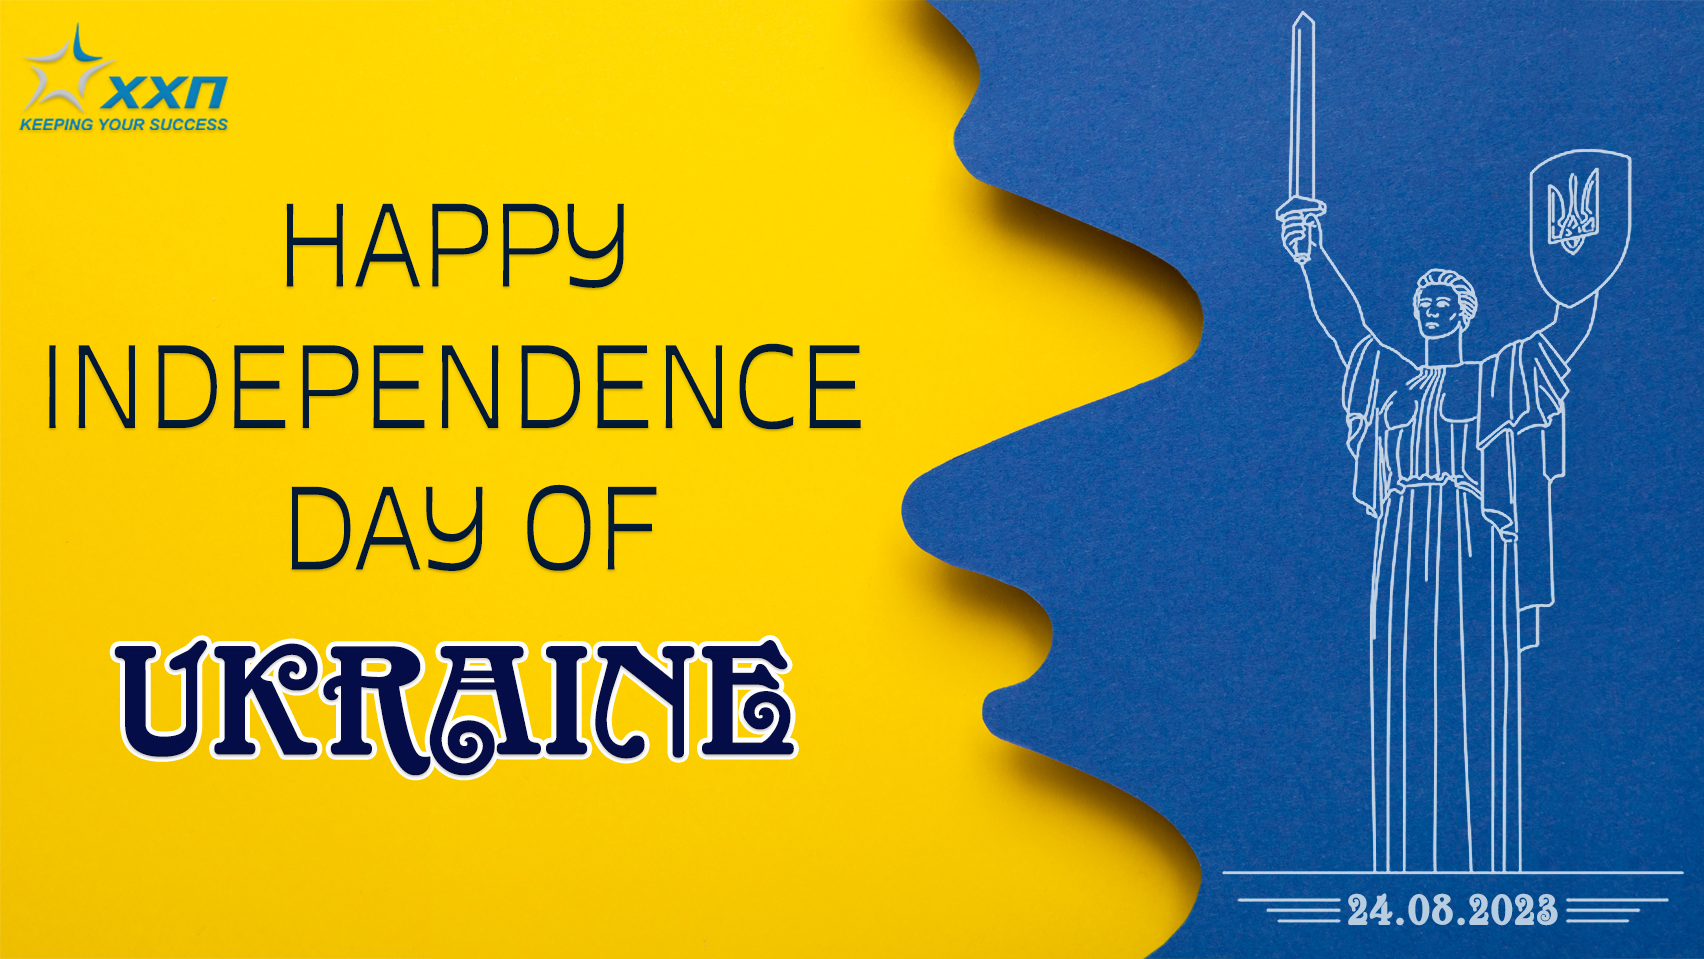 Congratulations on the 32nd anniversary of the Independence of Ukraine!